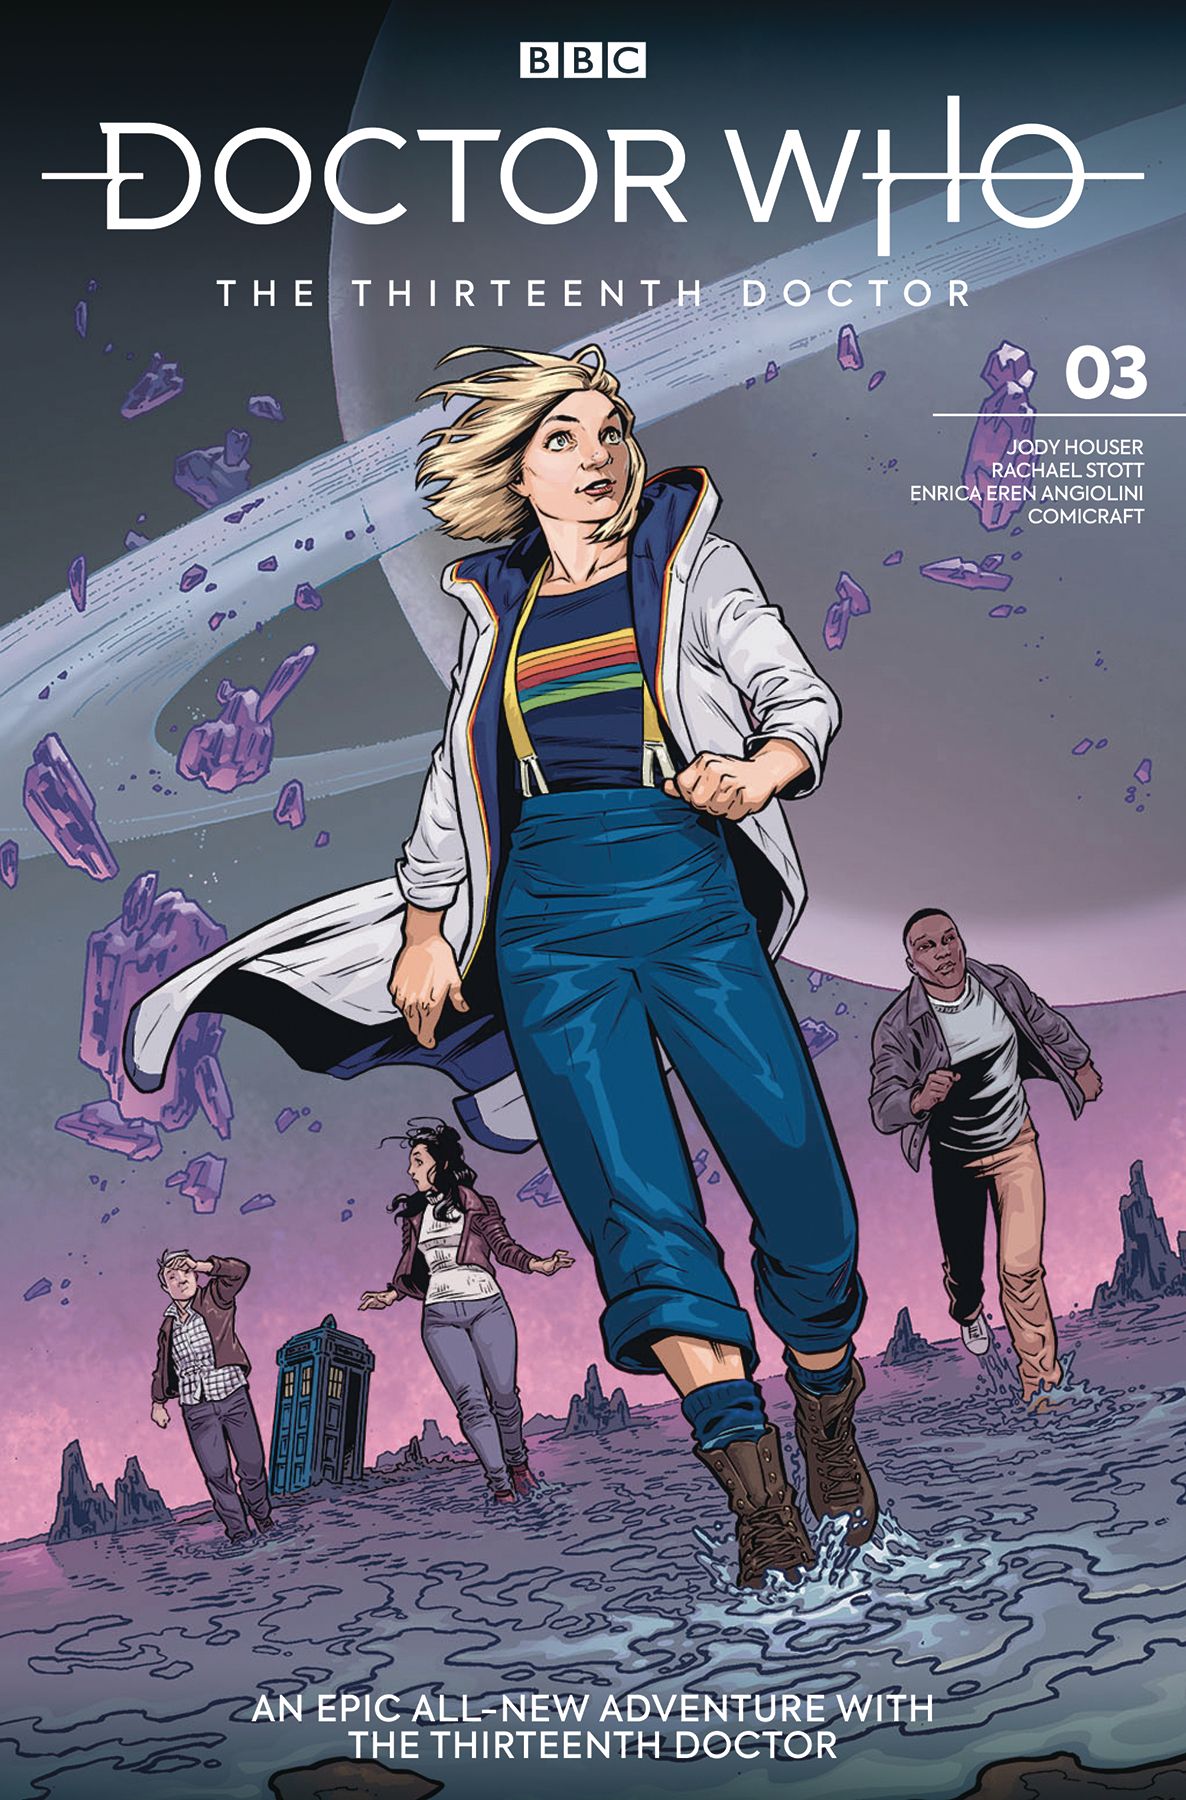 Doctor Who: The Thirteenth Doctor #3 Comic